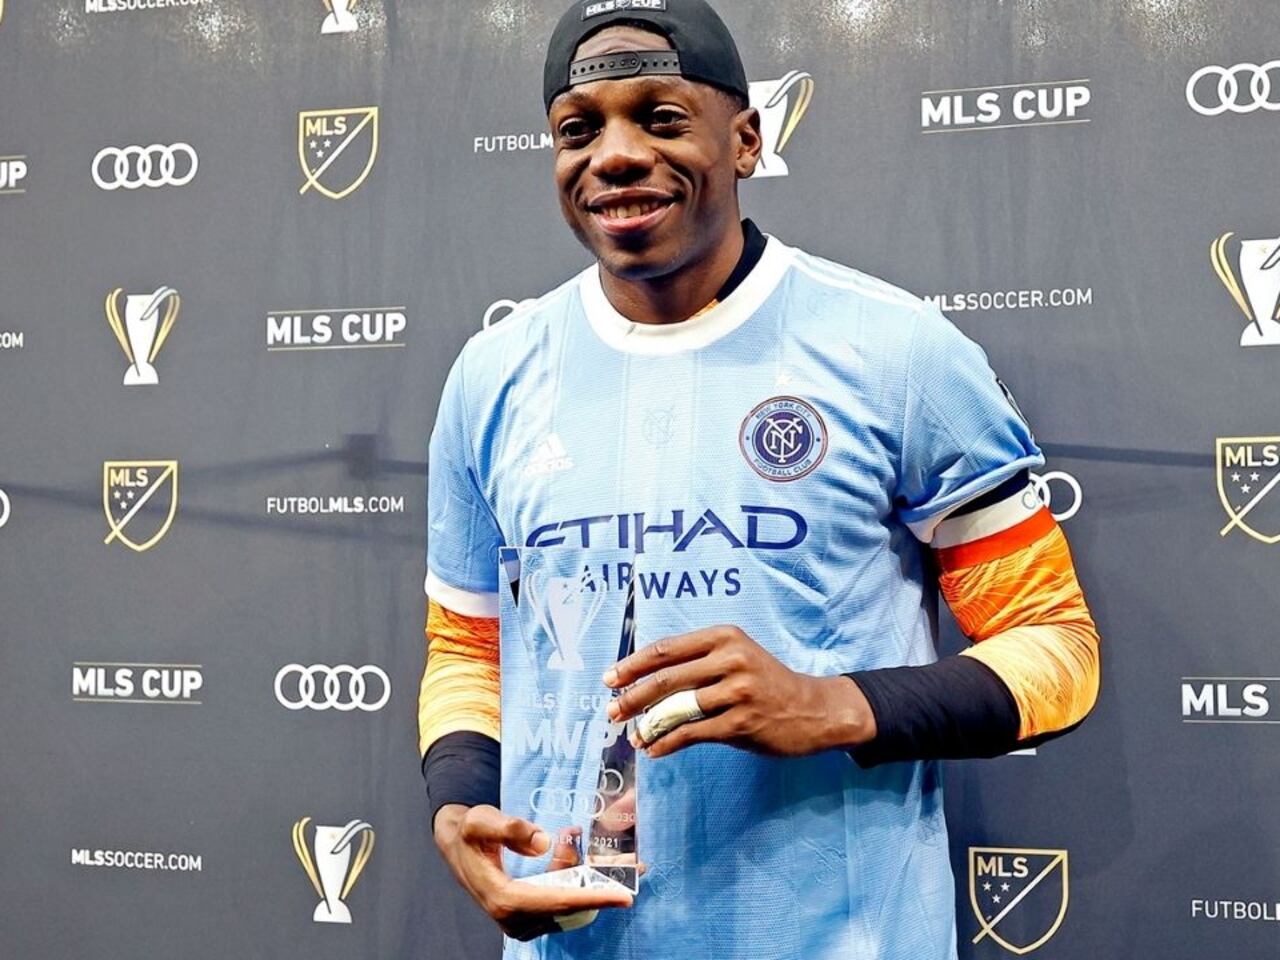 Sean Johnson, the NYCFC goalkeeper, wins MVP of the MLS Cup